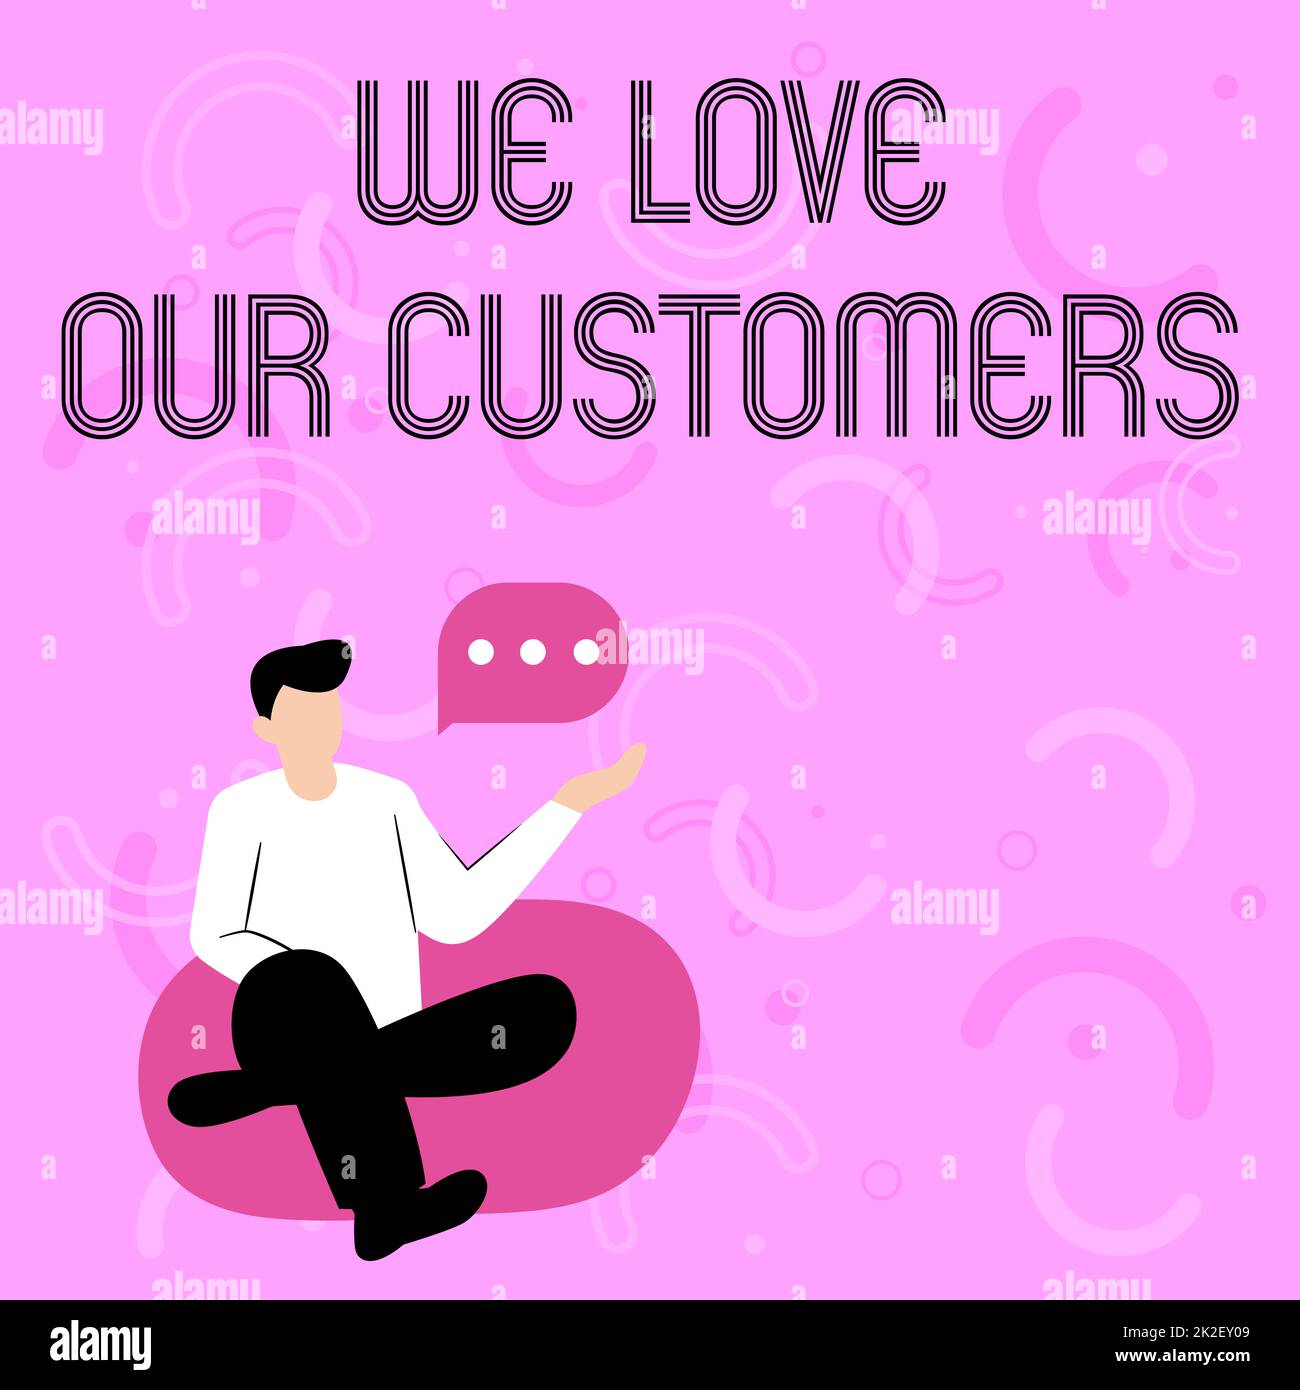 Writing displaying text We Love Our Customers. Internet Concept We Love Our Customers Illustration Of Businessman Sitting On Soft Sofa Chair Talking. Stock Photo